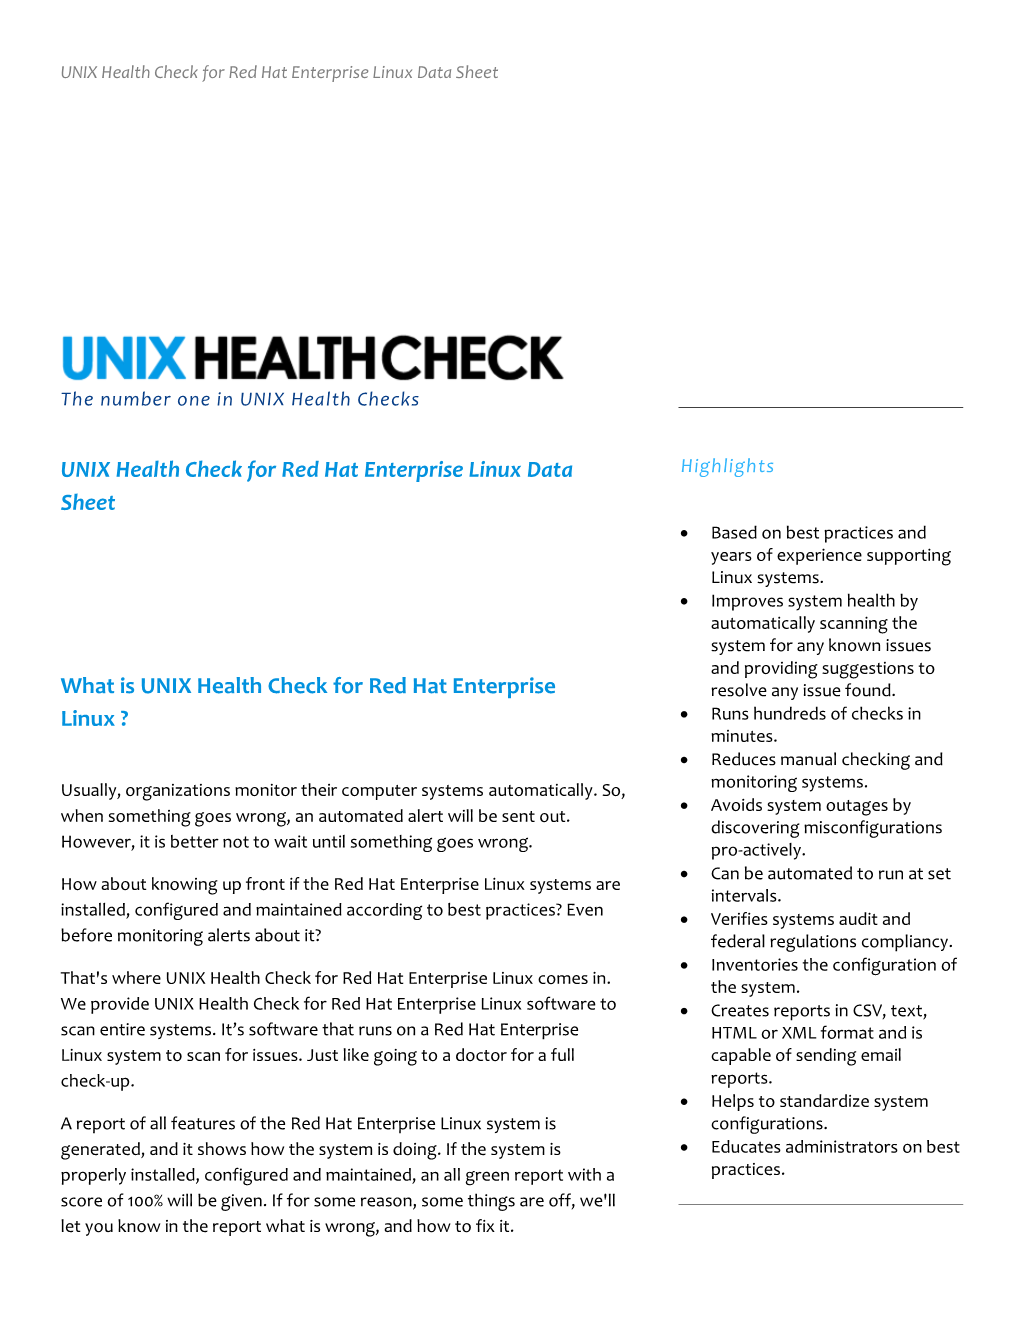 UNIX Health Check for Red Hat Enterprise Linux Data Sheet What